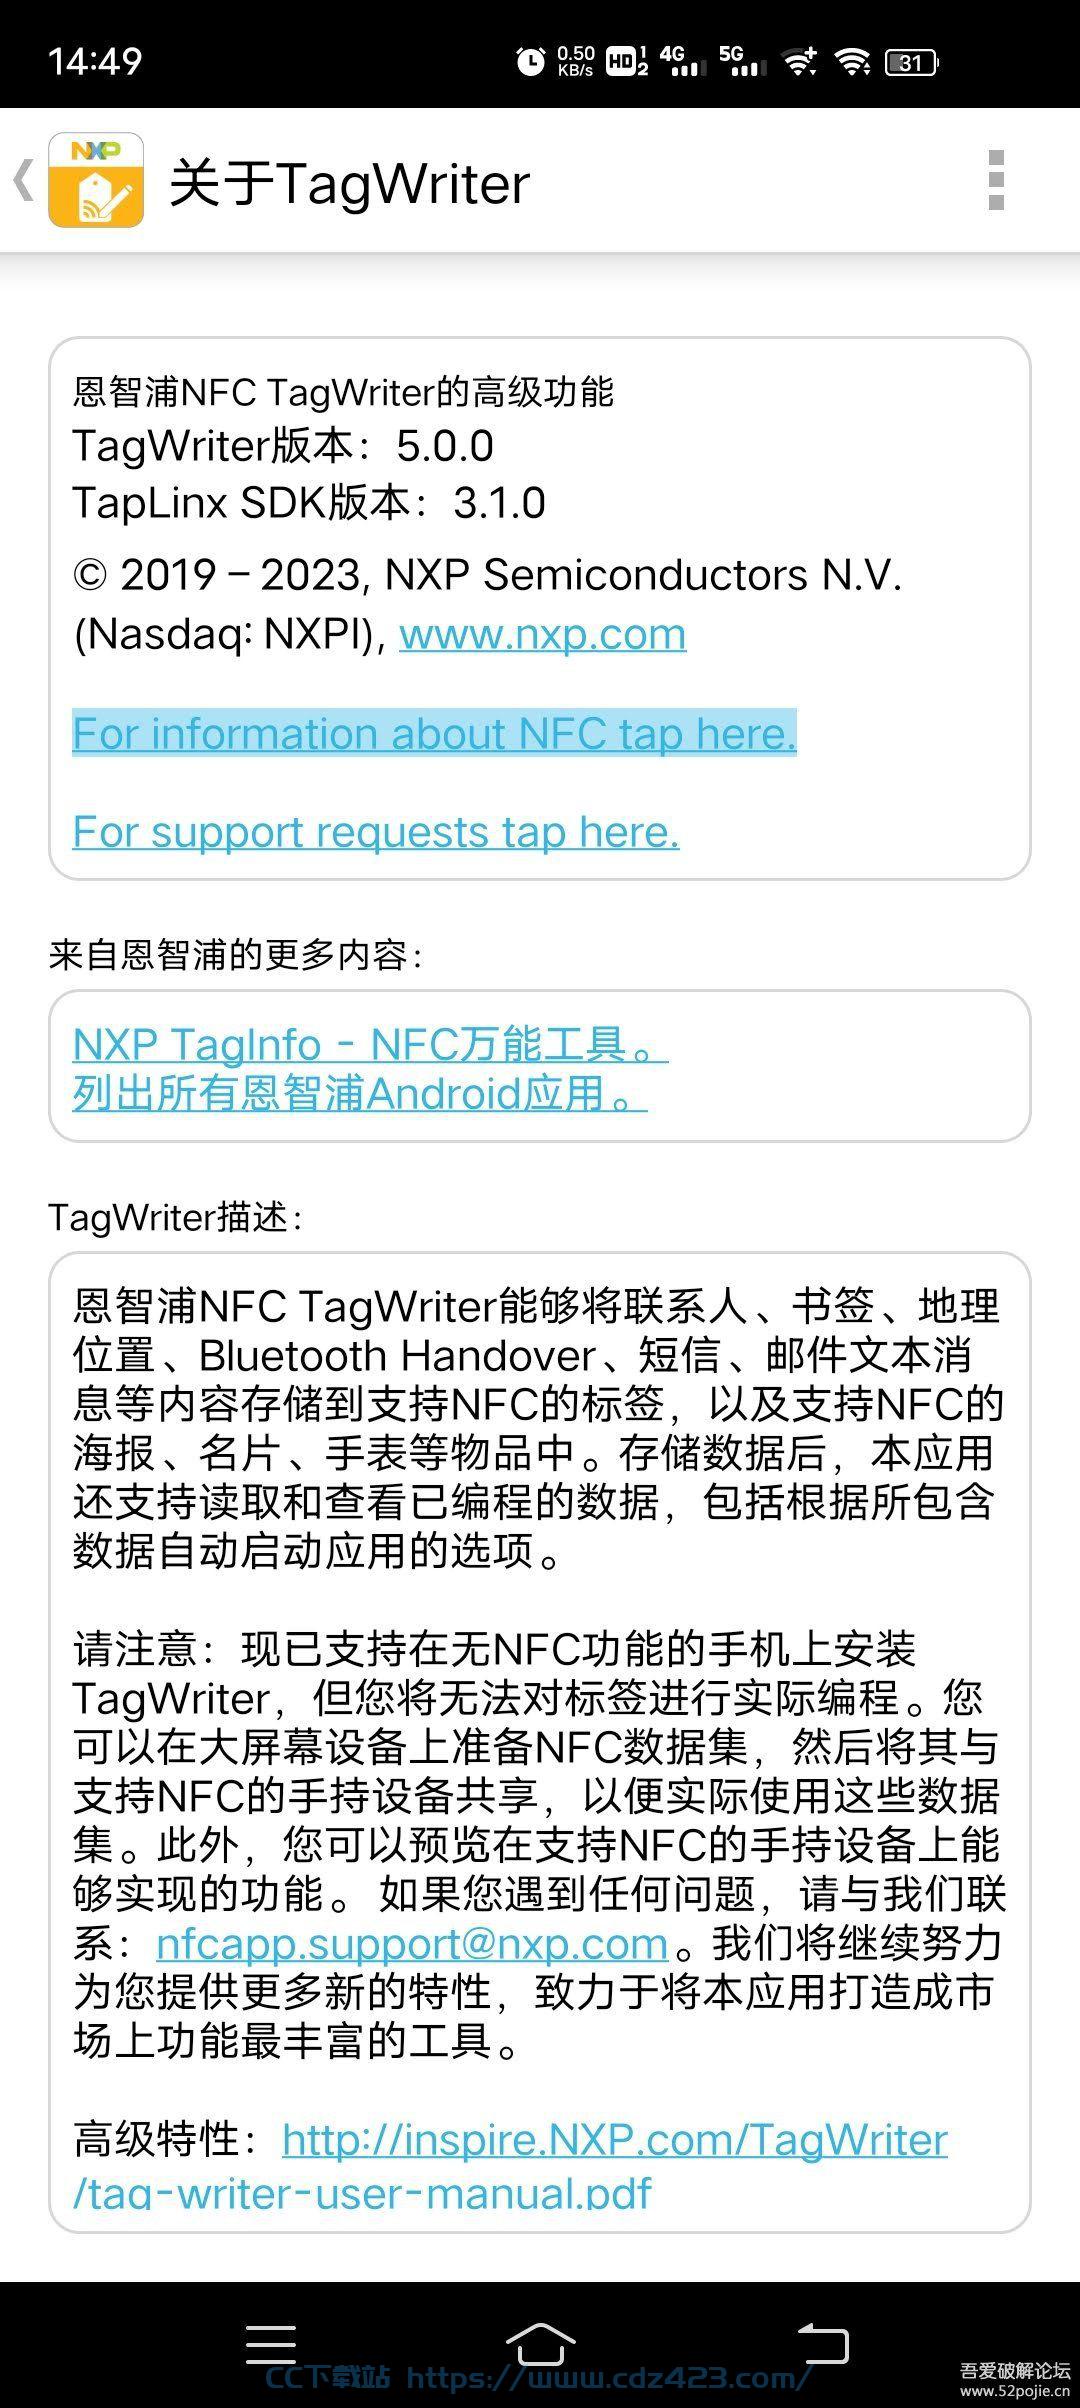 [Android] NFC TagWriter by NXP 5.0.0 标签写入工具